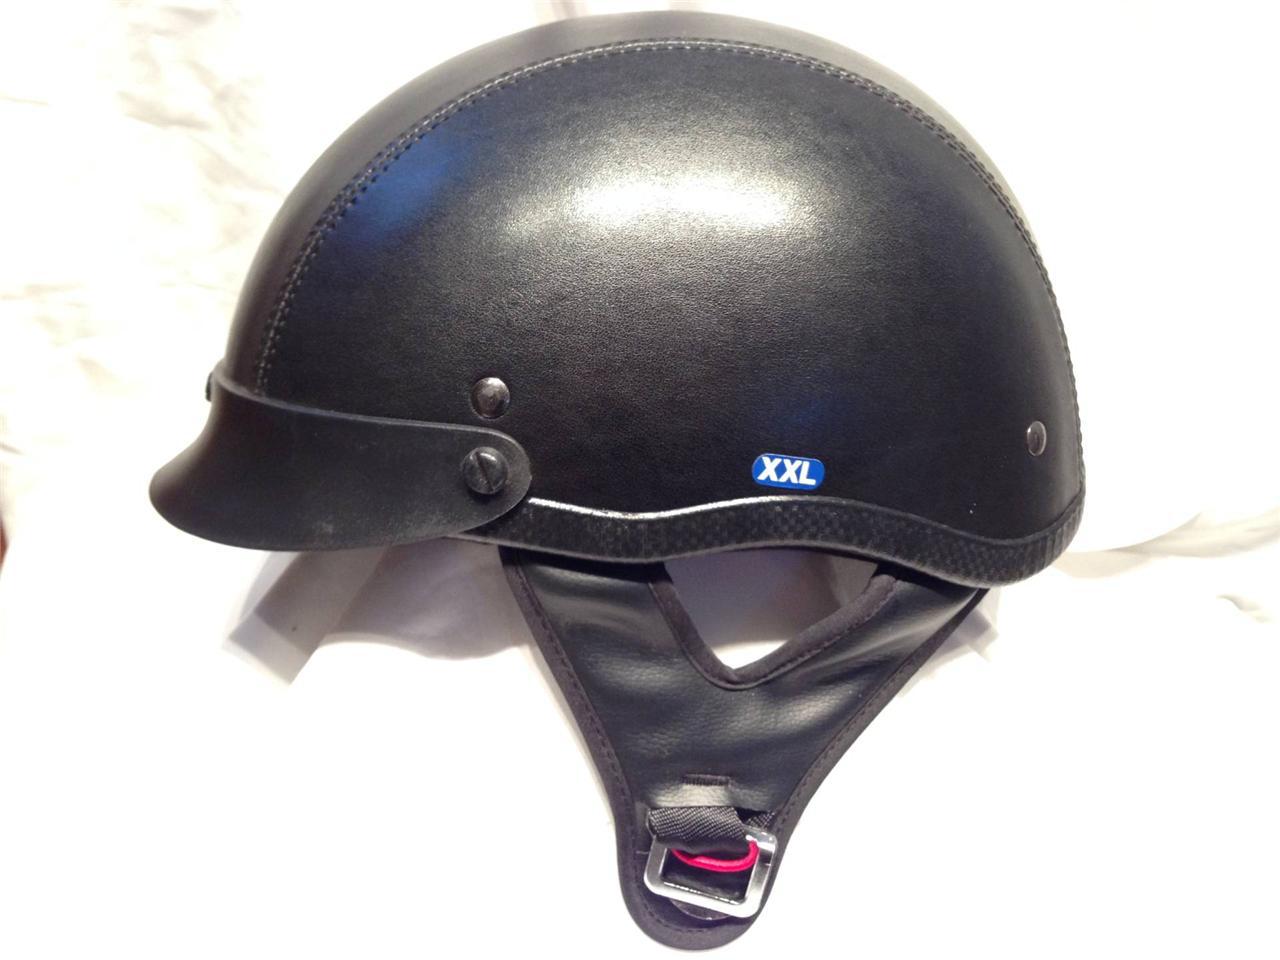 Leather half helmet low profile traditional motorcycle dot approved new s m l xl